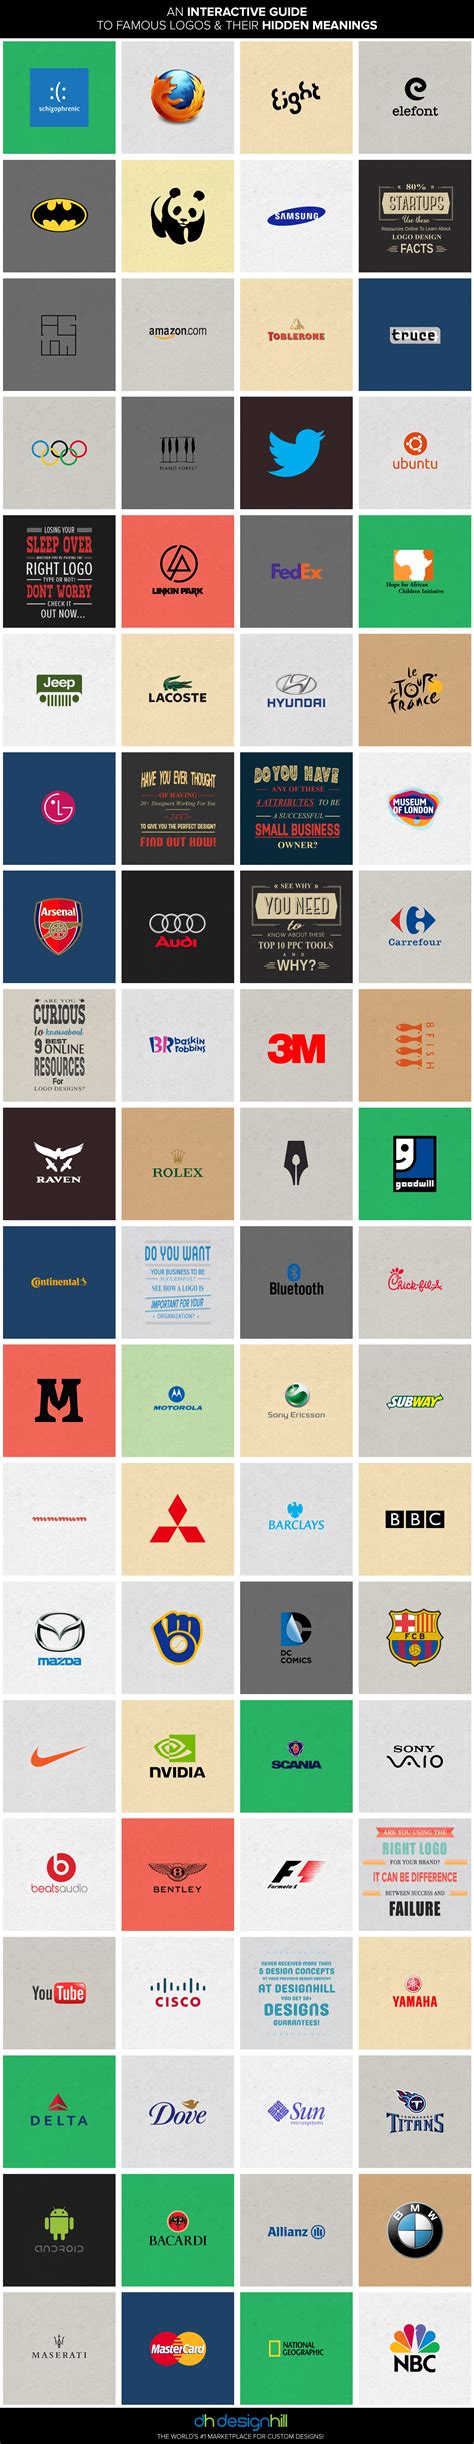 Famous Company Logos with Hidden Meanings & Messages | Designhill.